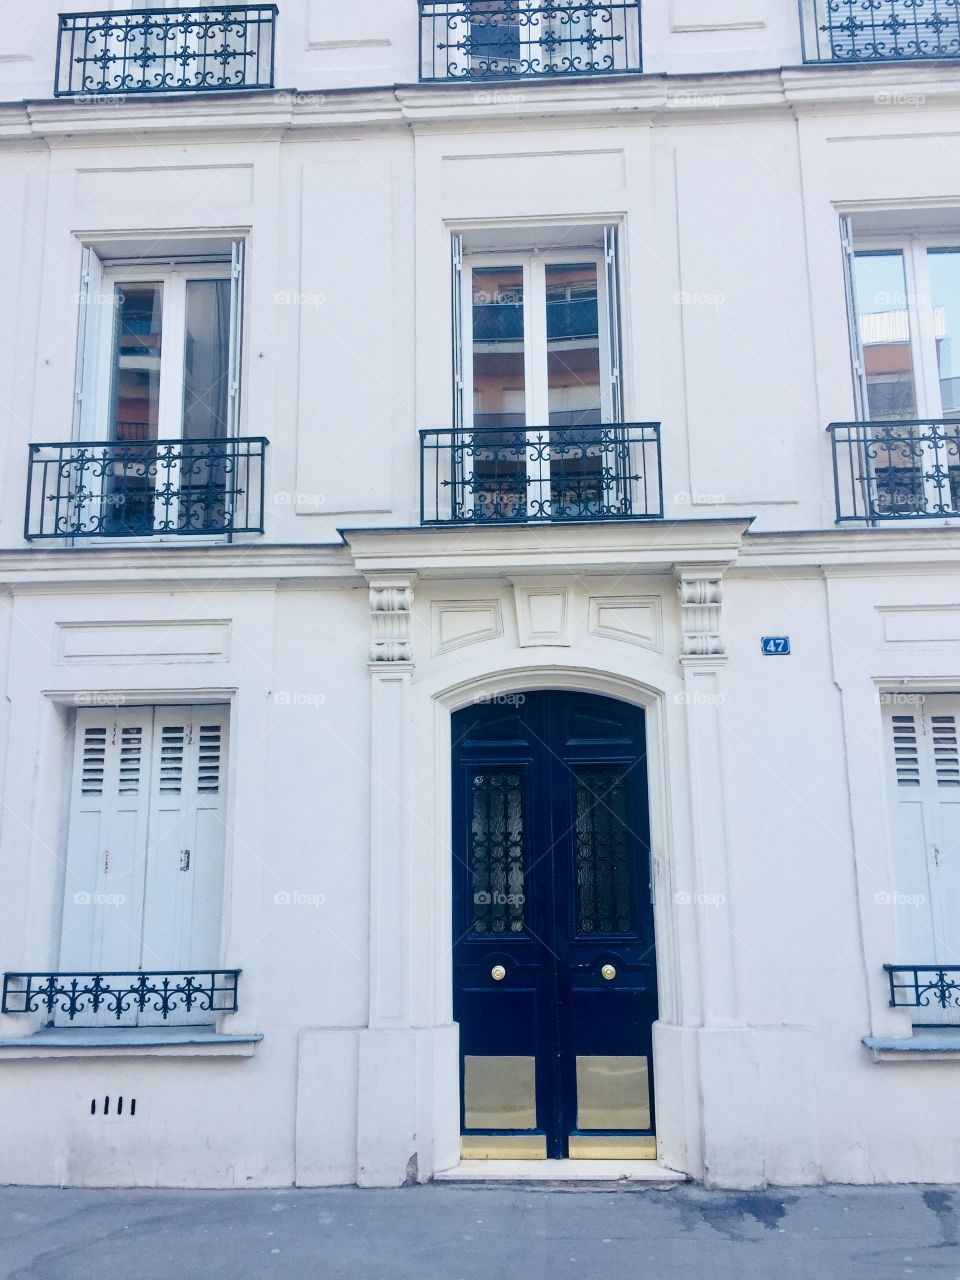 Apartment in Paris white building with a pop of blue colored doorway